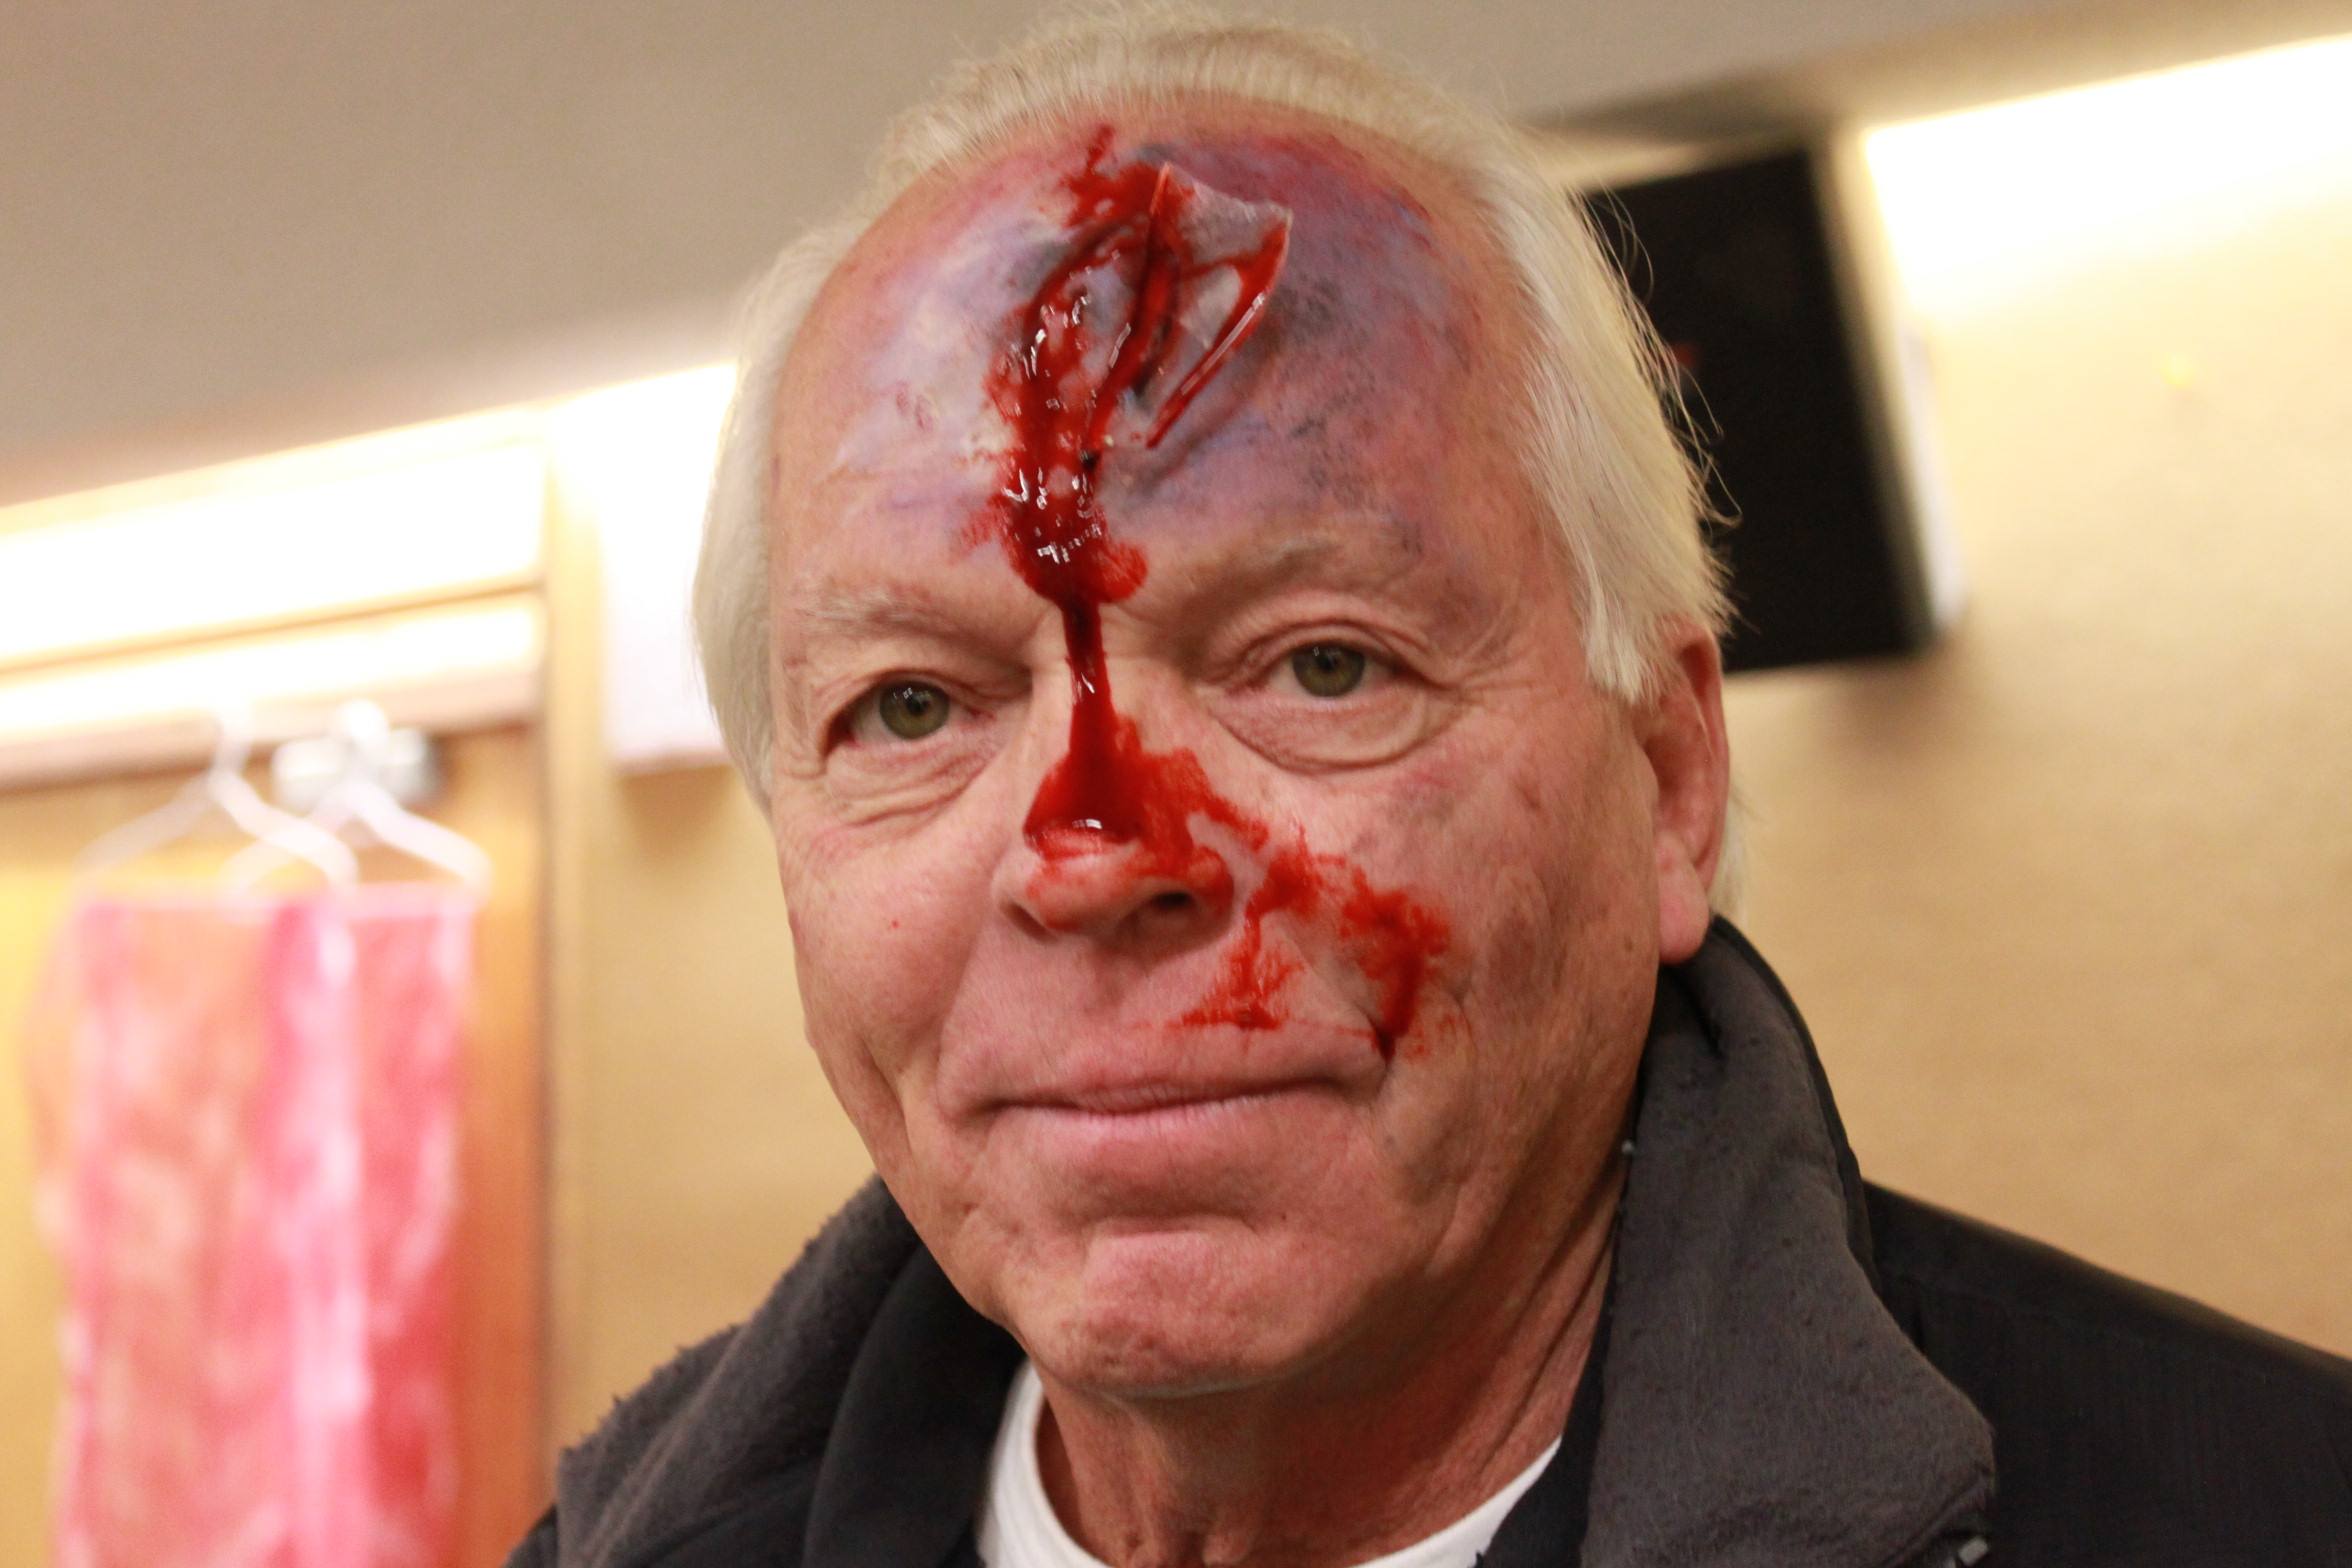 Red Cross volunteer Tim Steele. Don't worry! It's not real - it's just make-up, but it looks real! Volunteers act as casualties. 